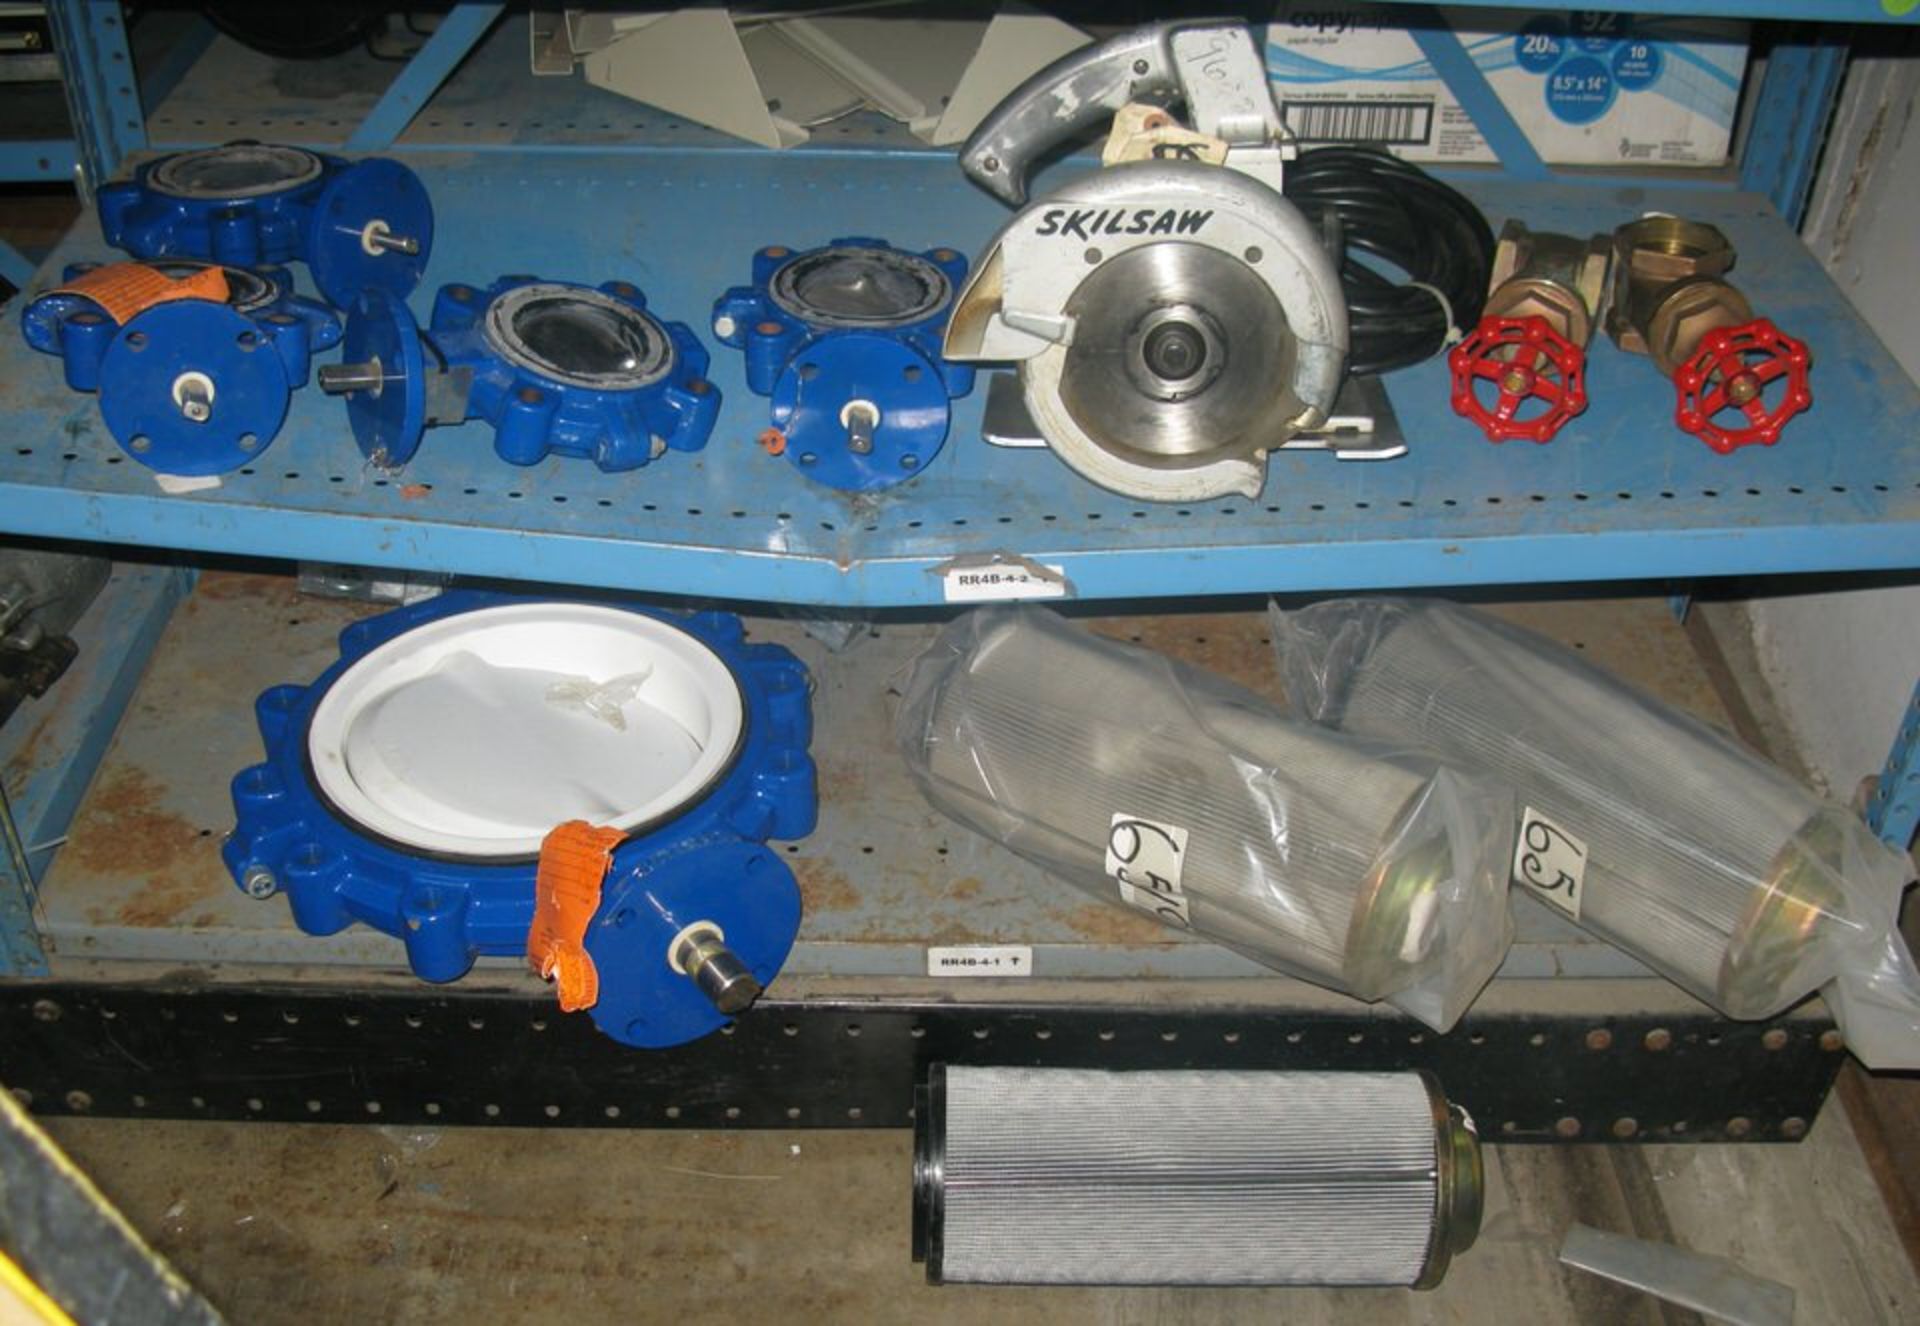 Butterfly valve, metal mesh filters, electric skill saw and shut-off valves